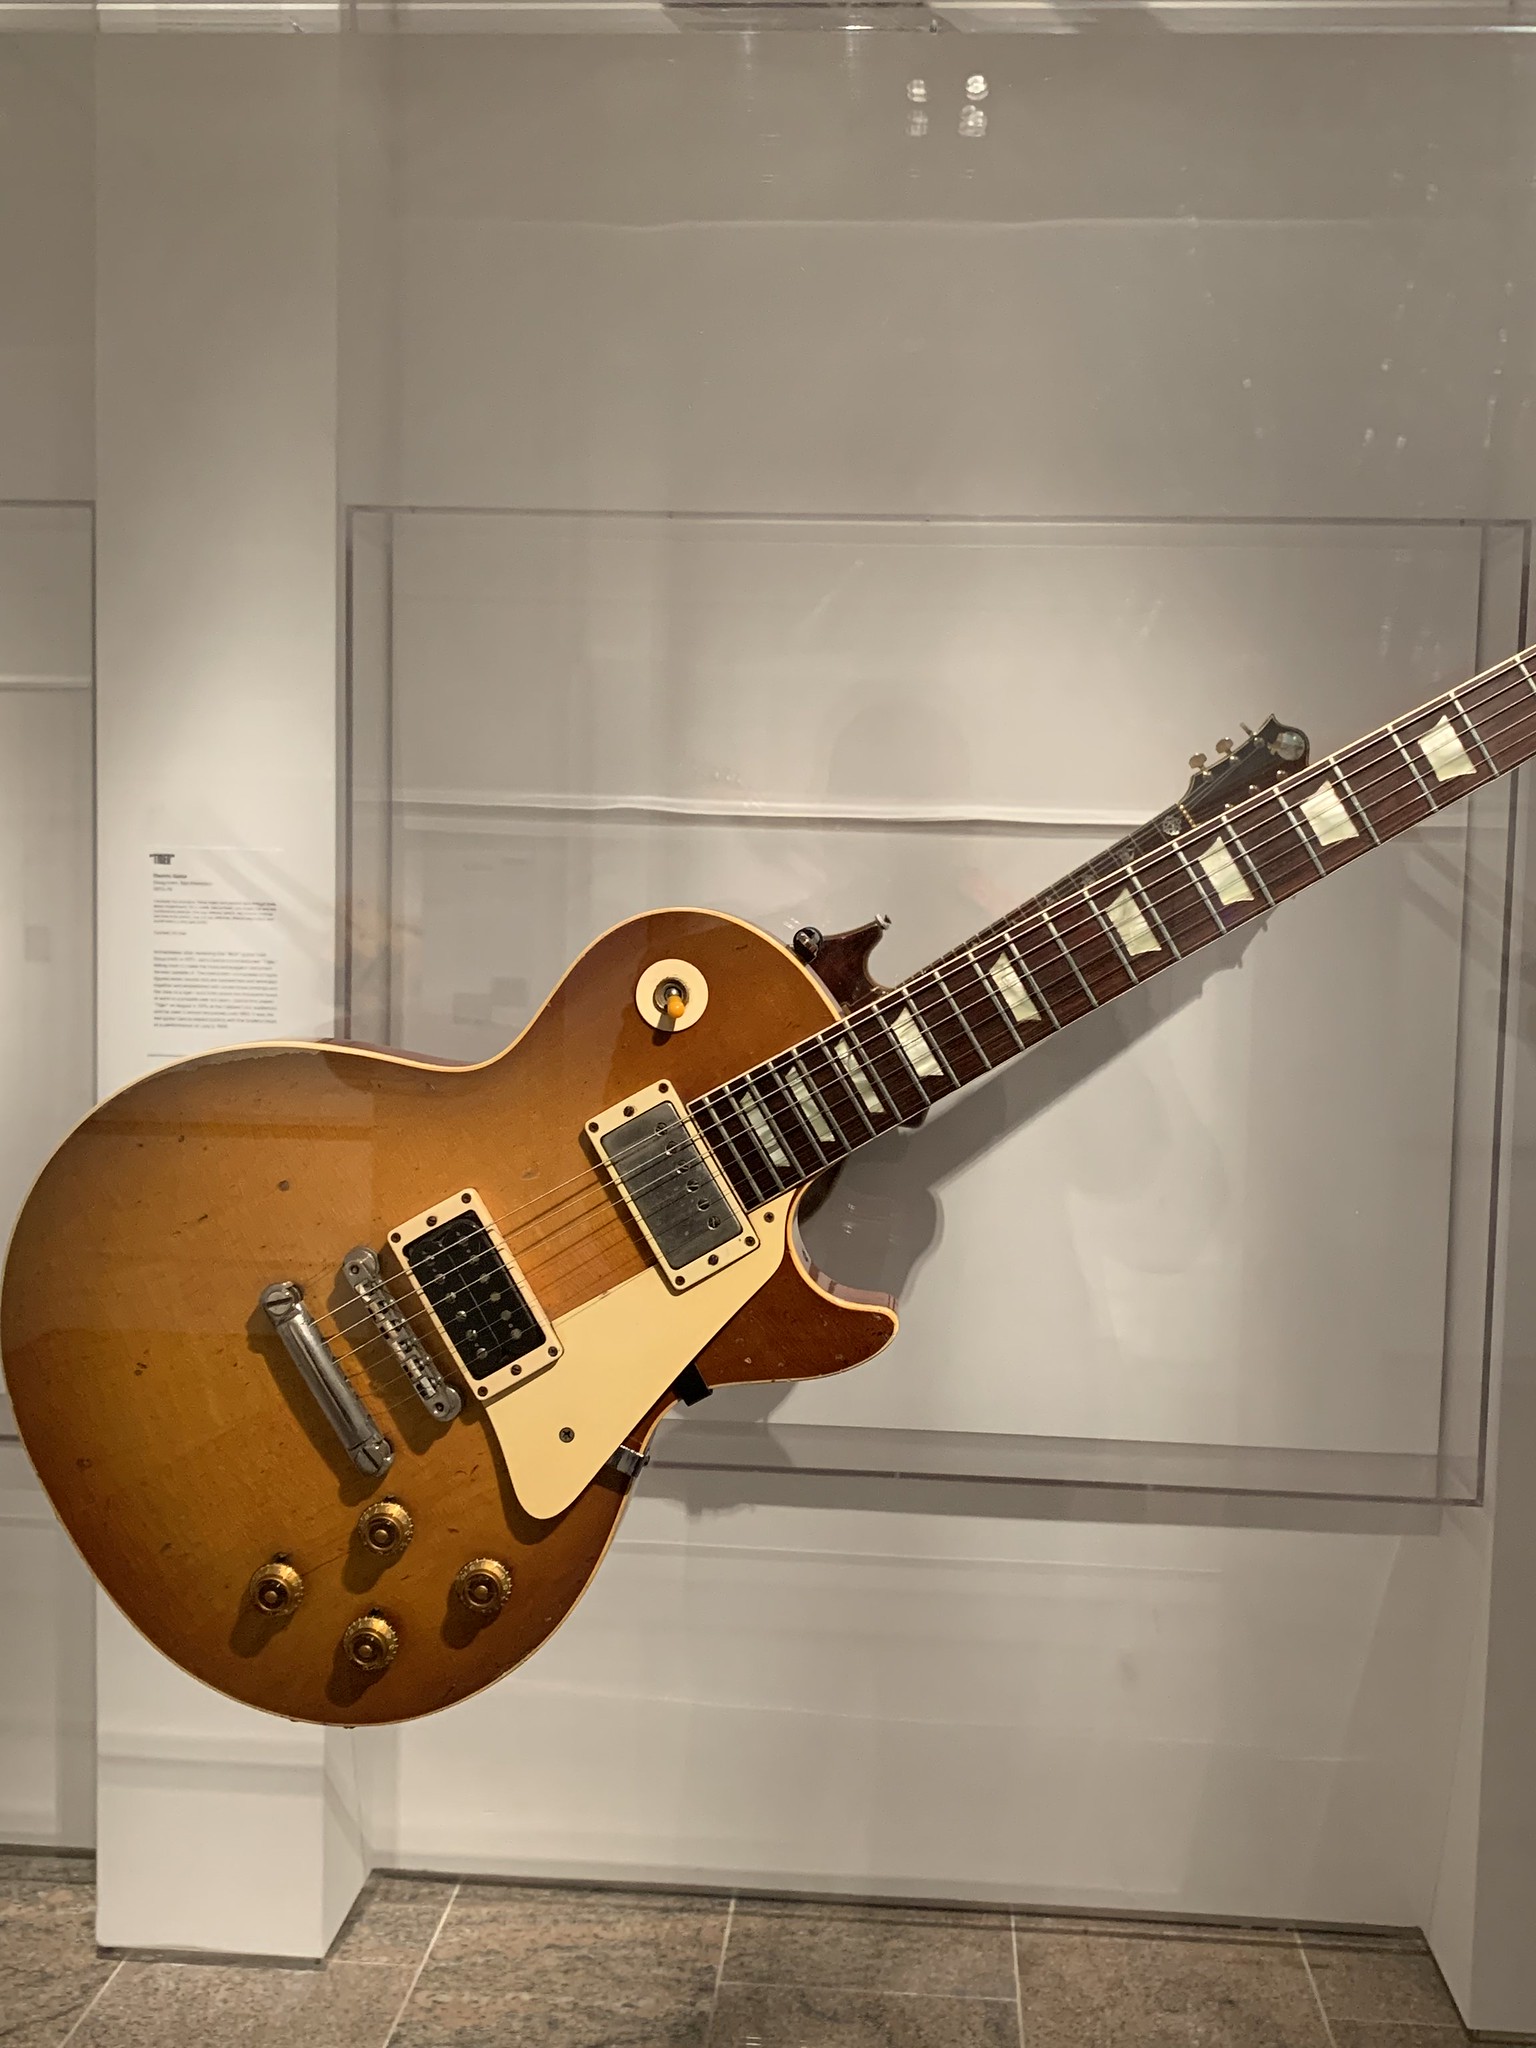 Jimmy Page "Number One" Les Paul